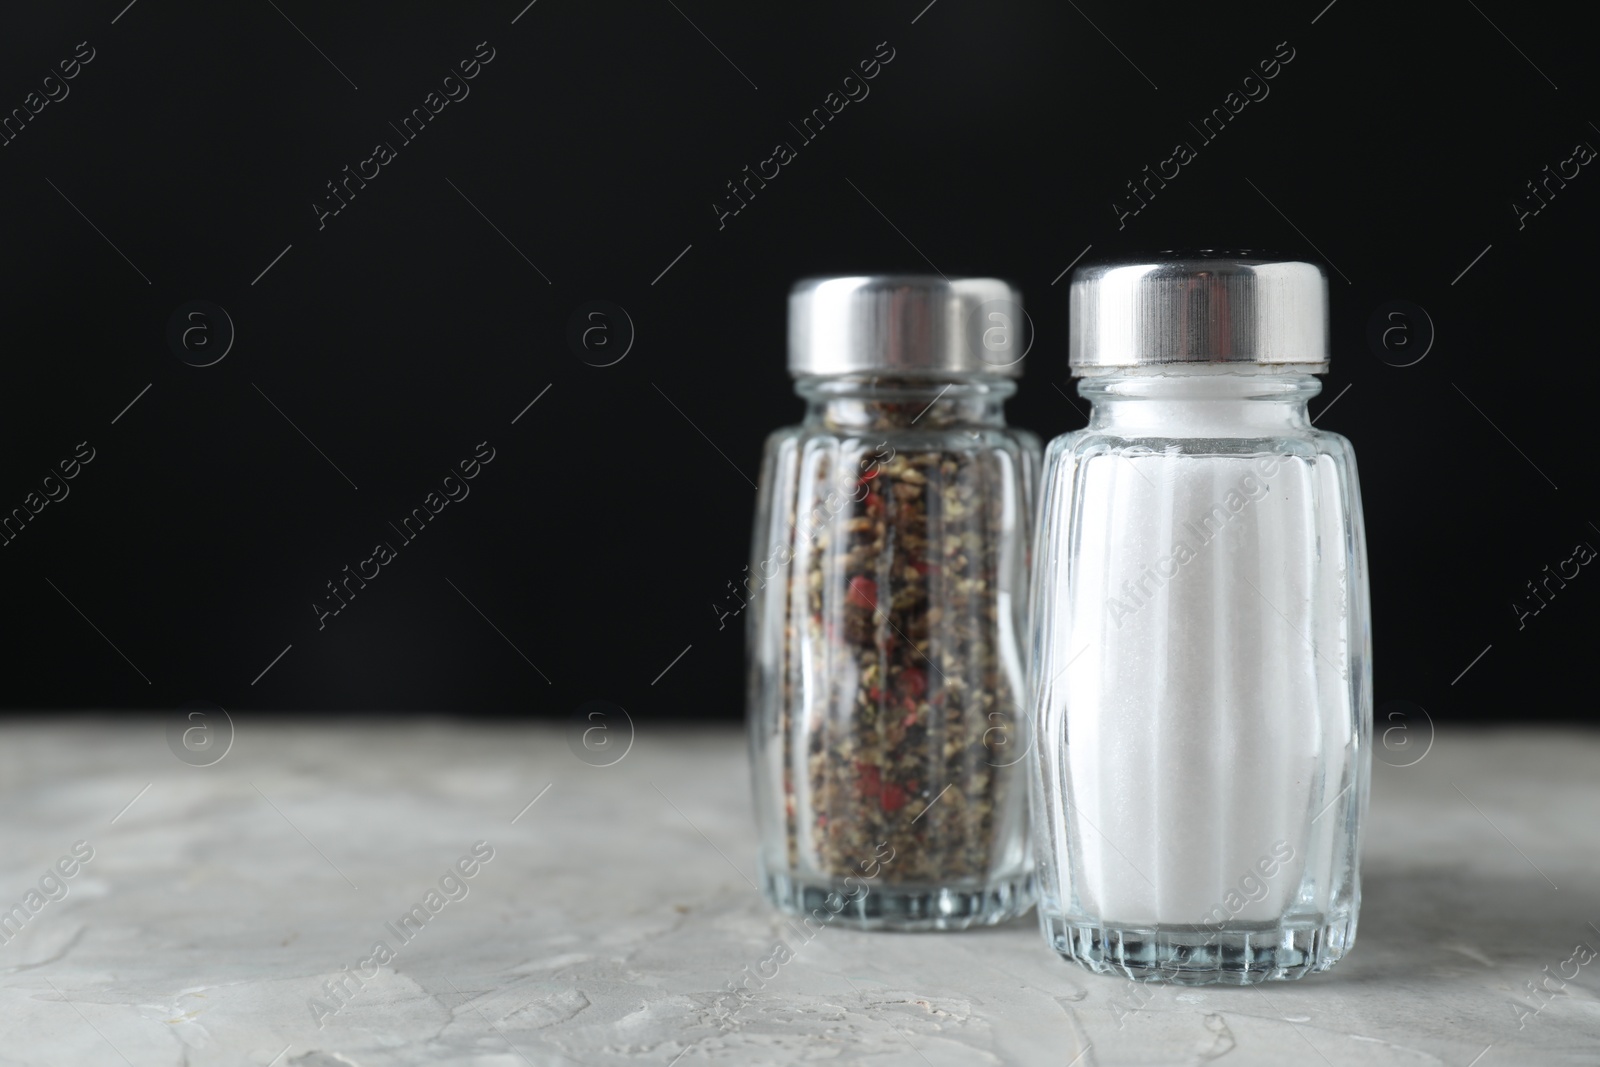 Photo of Salt and pepper shakers on light textured table against black background. Space for text